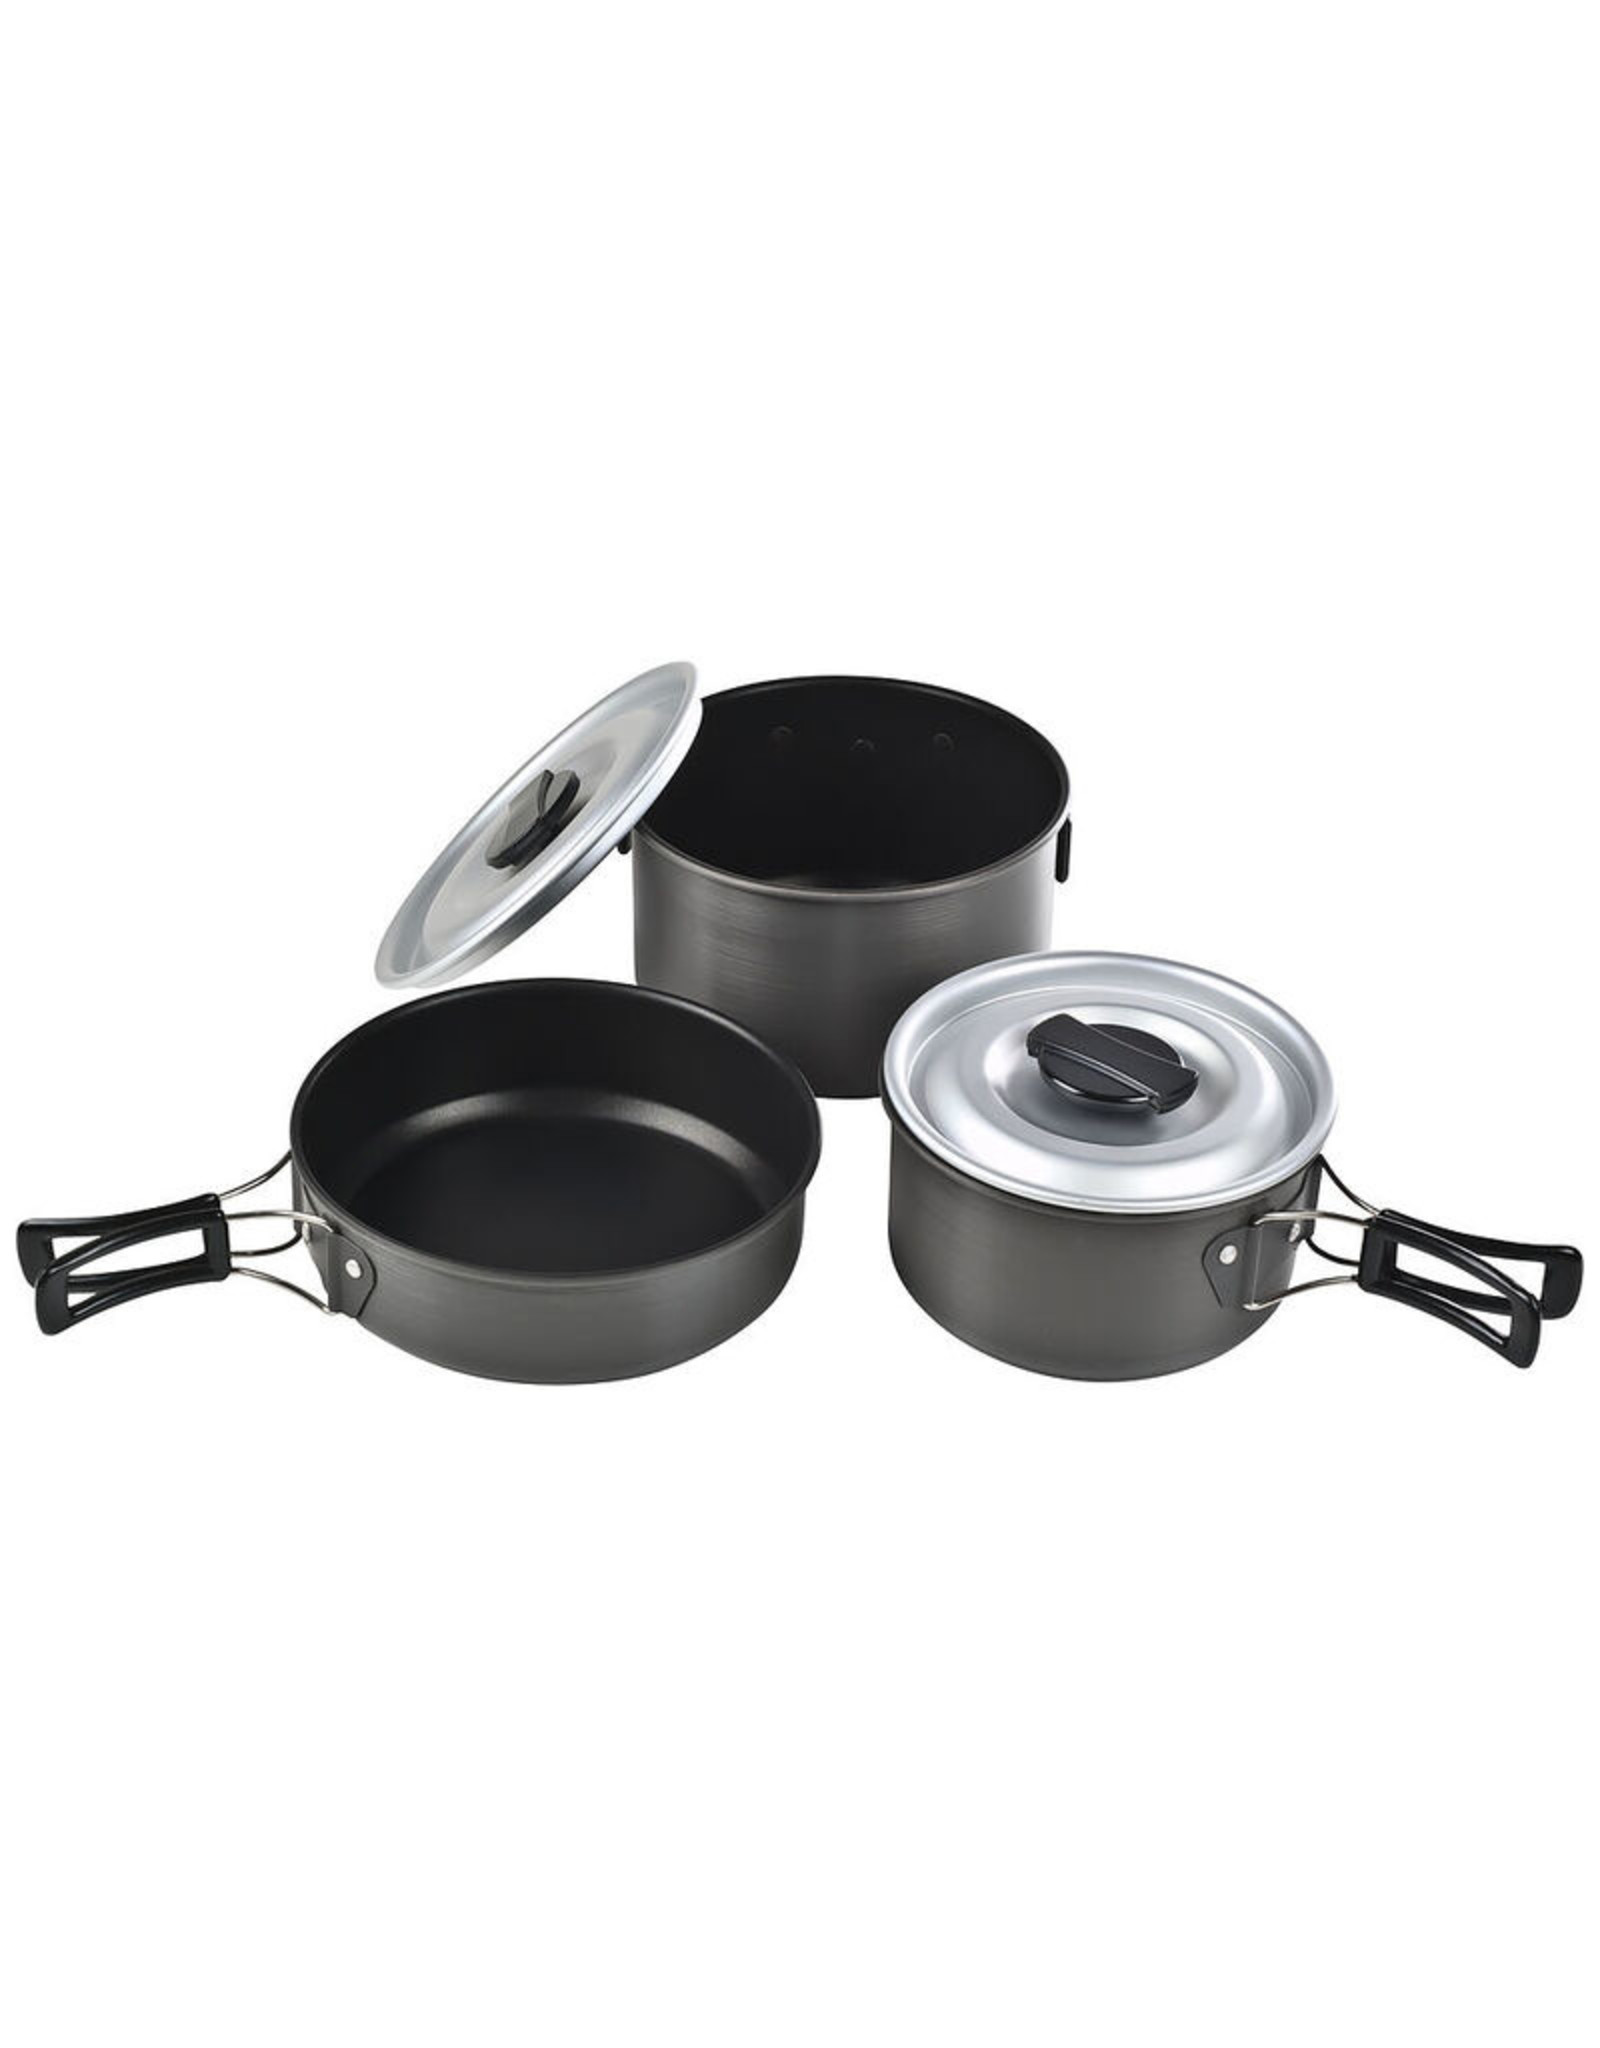 CHINOOK TECHNICAL OUTDOOR RIDGE HARD ANODIZED NON-STICK LARGE COOKSET - 41410